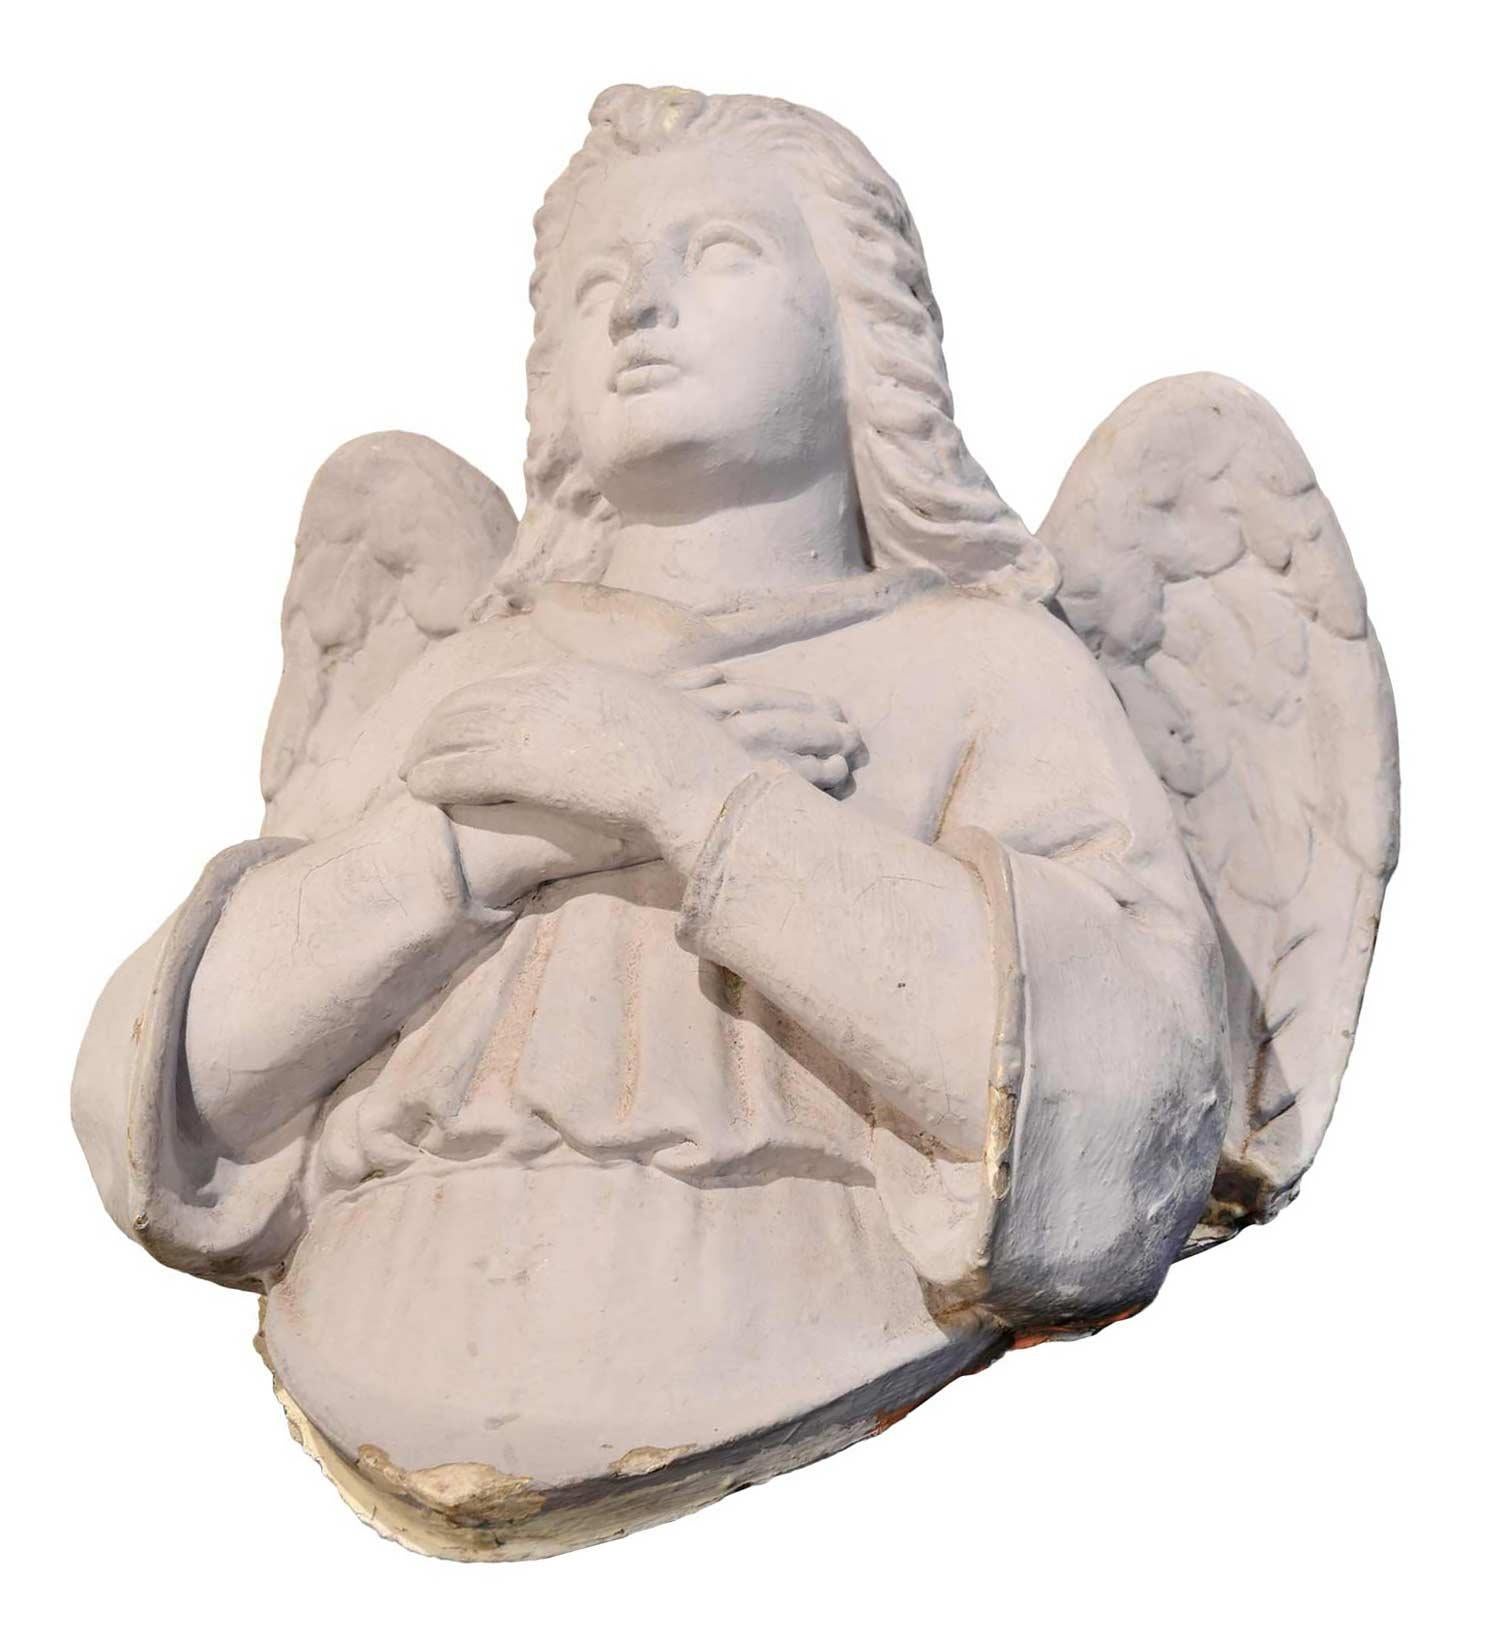 Plaster angel busts, perfect in the garden or as an architectural accent piece. 

Measures: 20